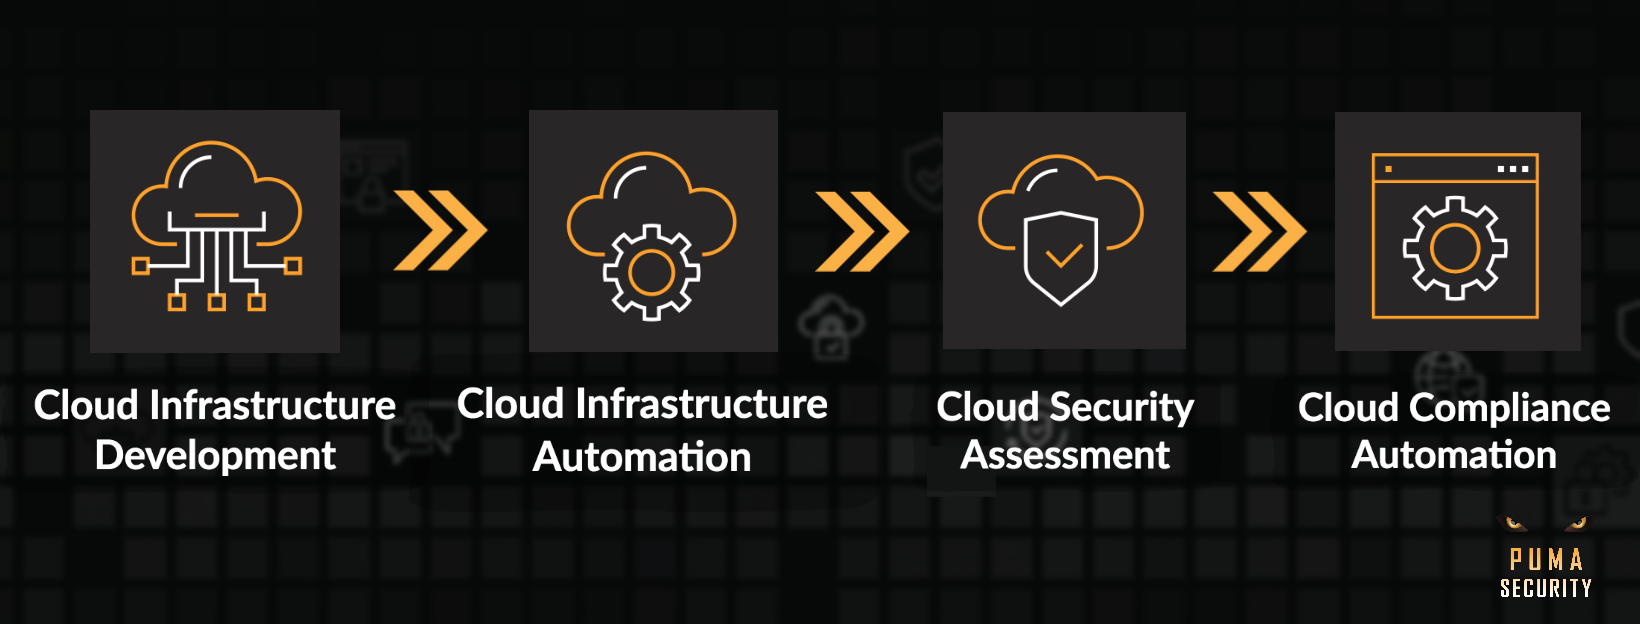 Implementation of Security in Cloud Infrastructure